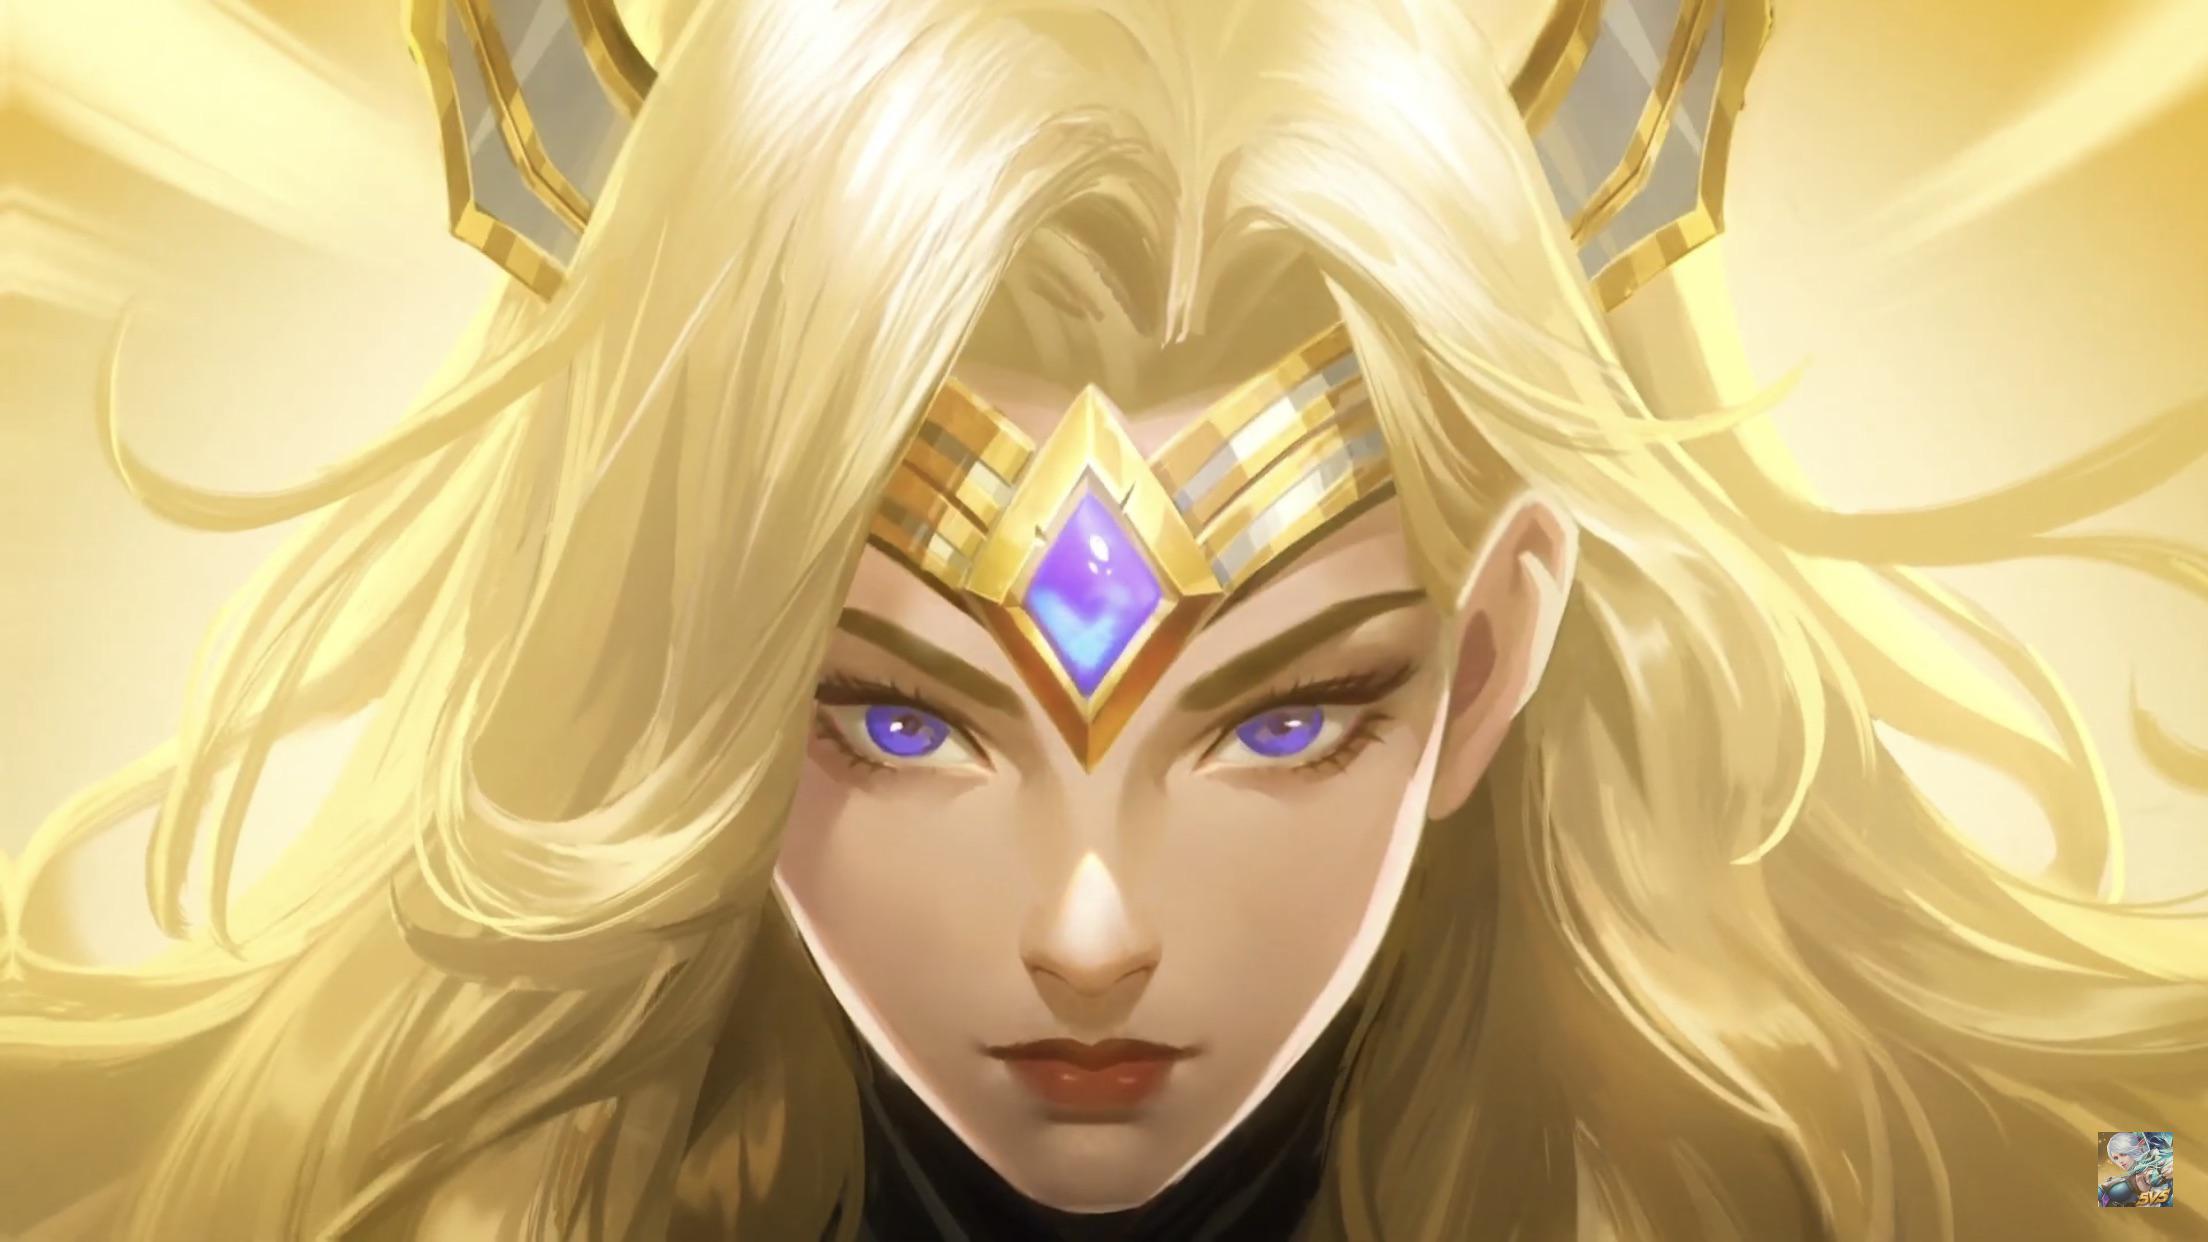 Unpopular Opinion: Call me what you want but blonde hair Freya